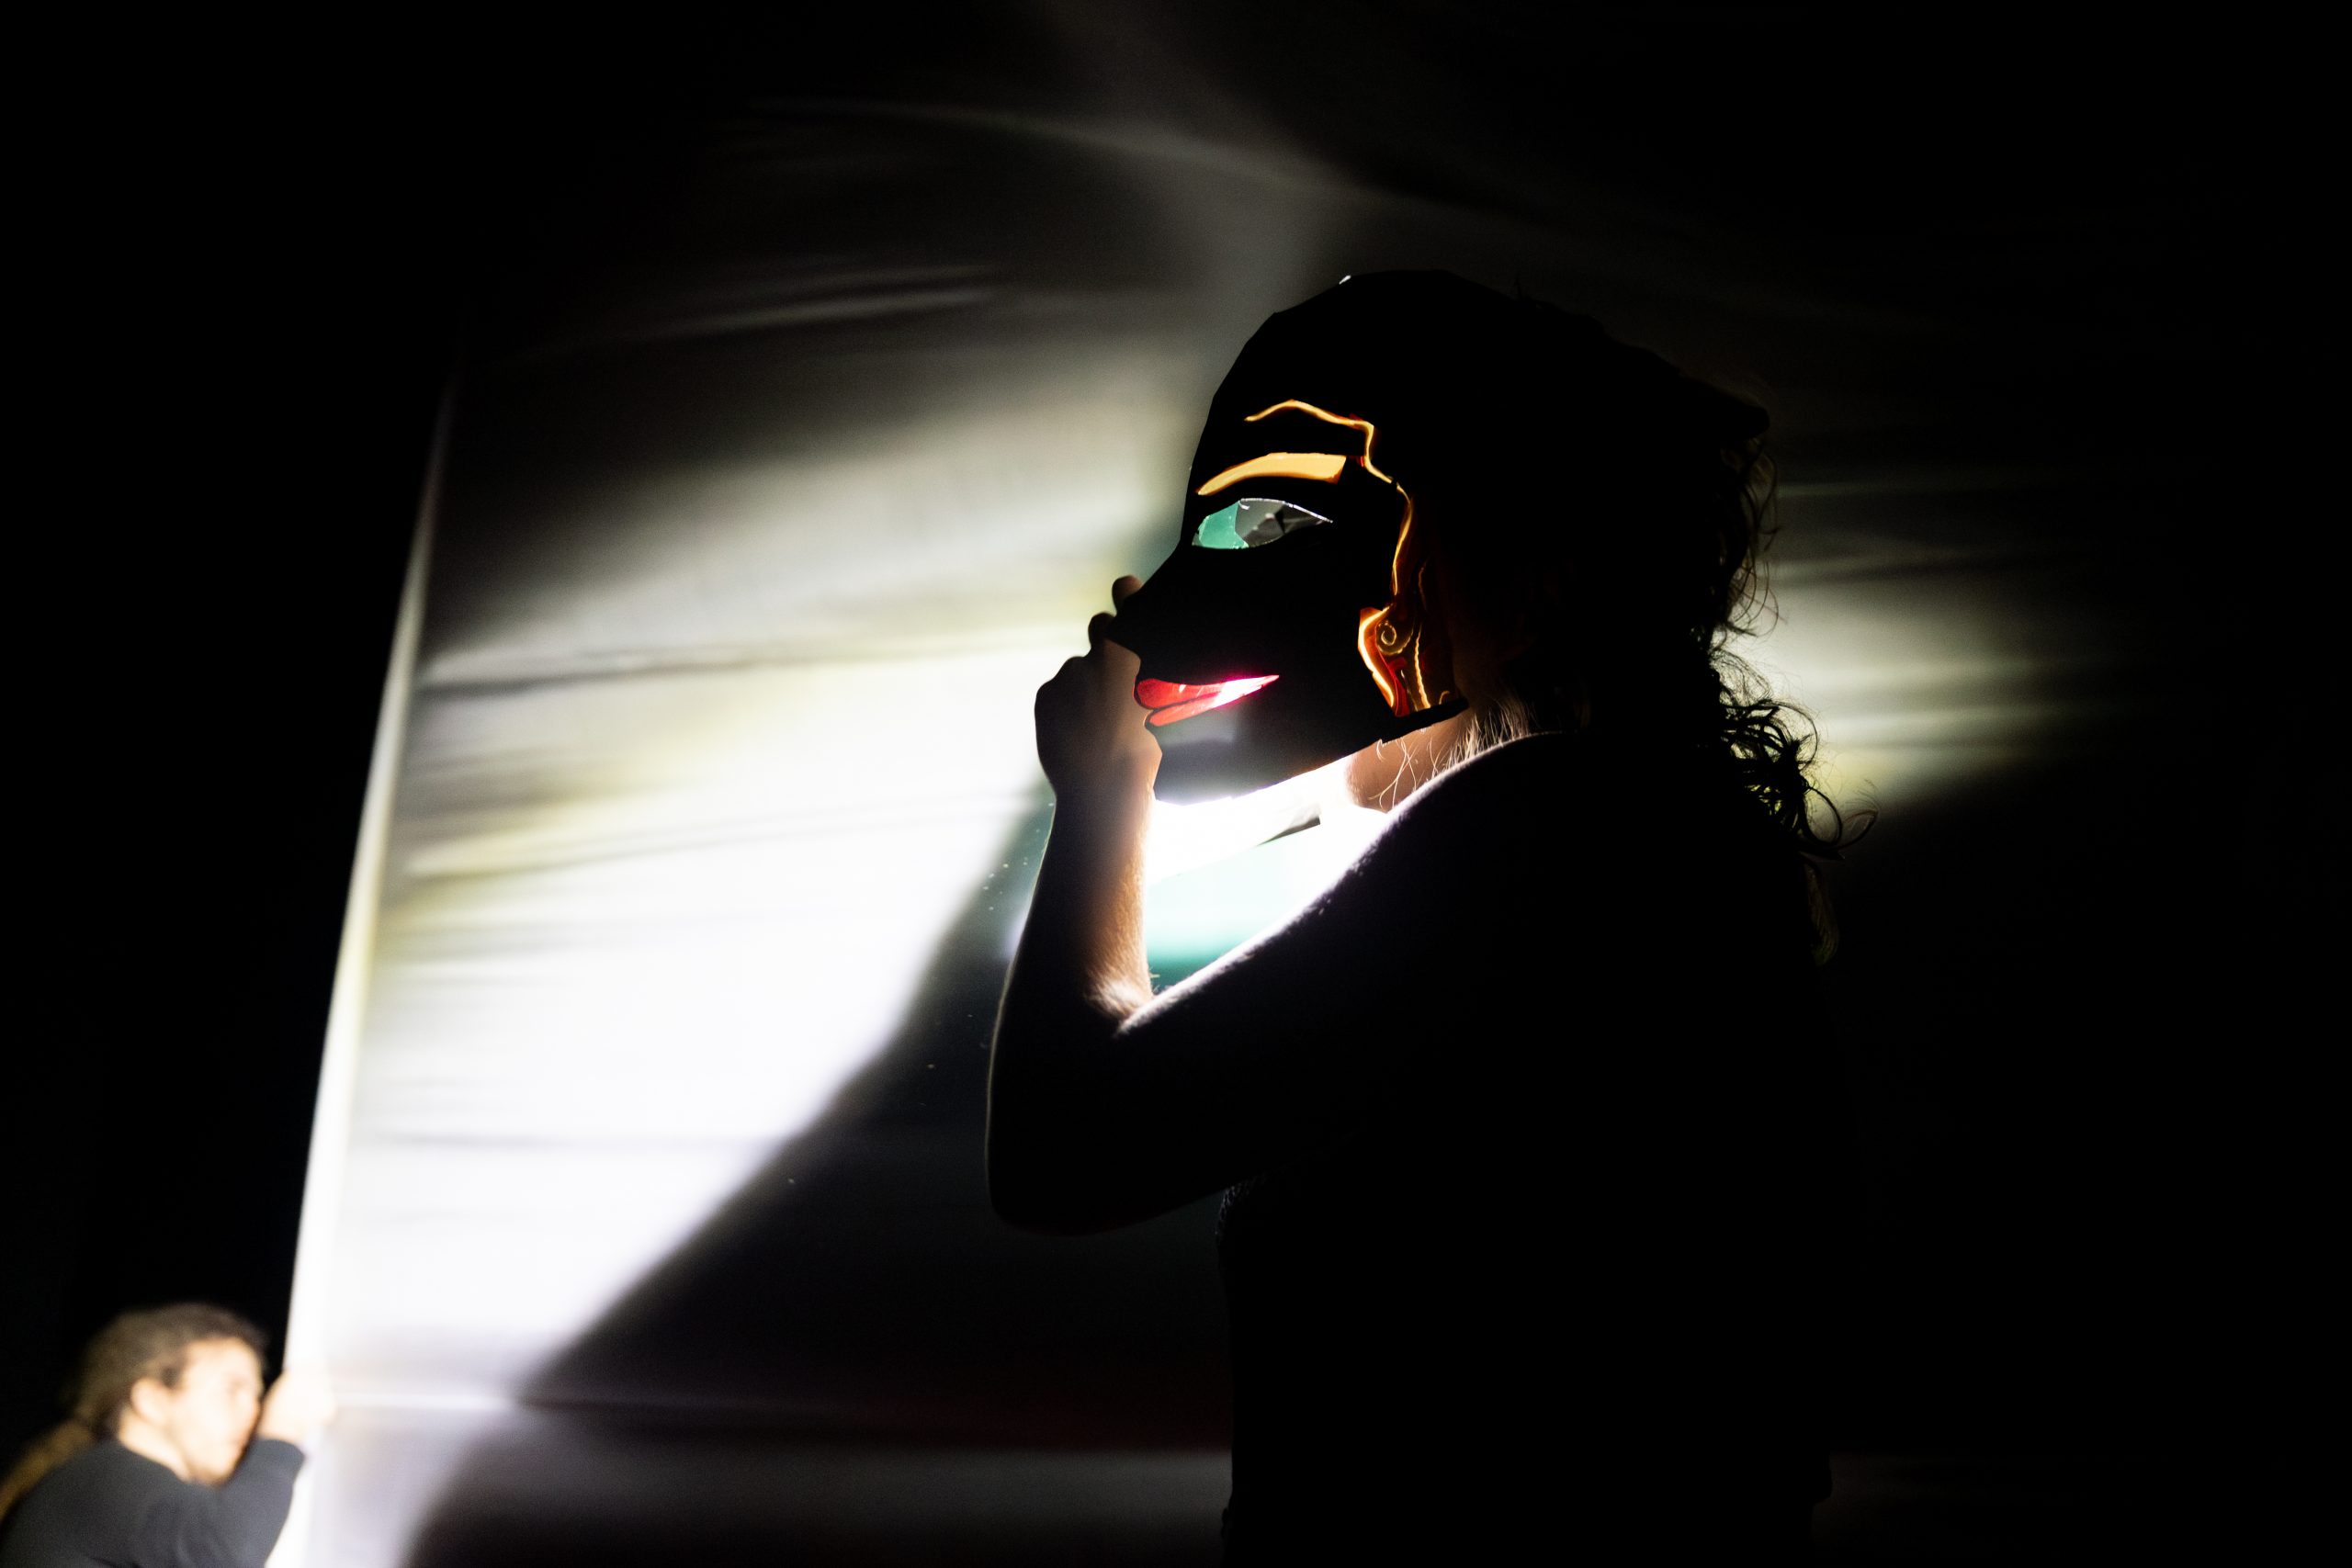 A cast member dons a mask while illuminated from behind a screen.